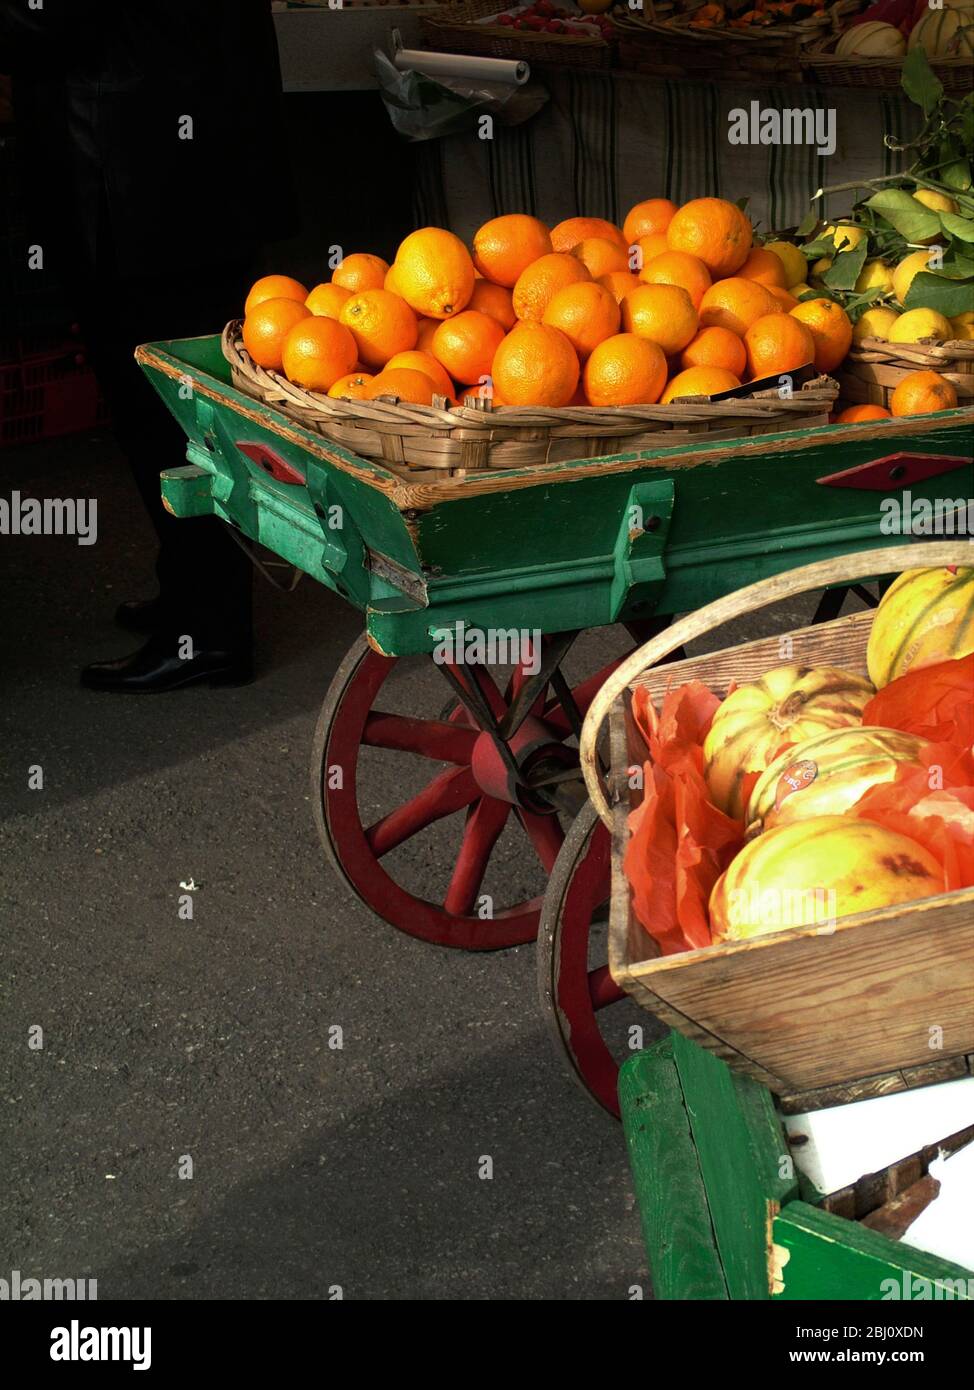 Green and red painted market handcart full of oranges in the market at Menton, south of France - Stock Photo